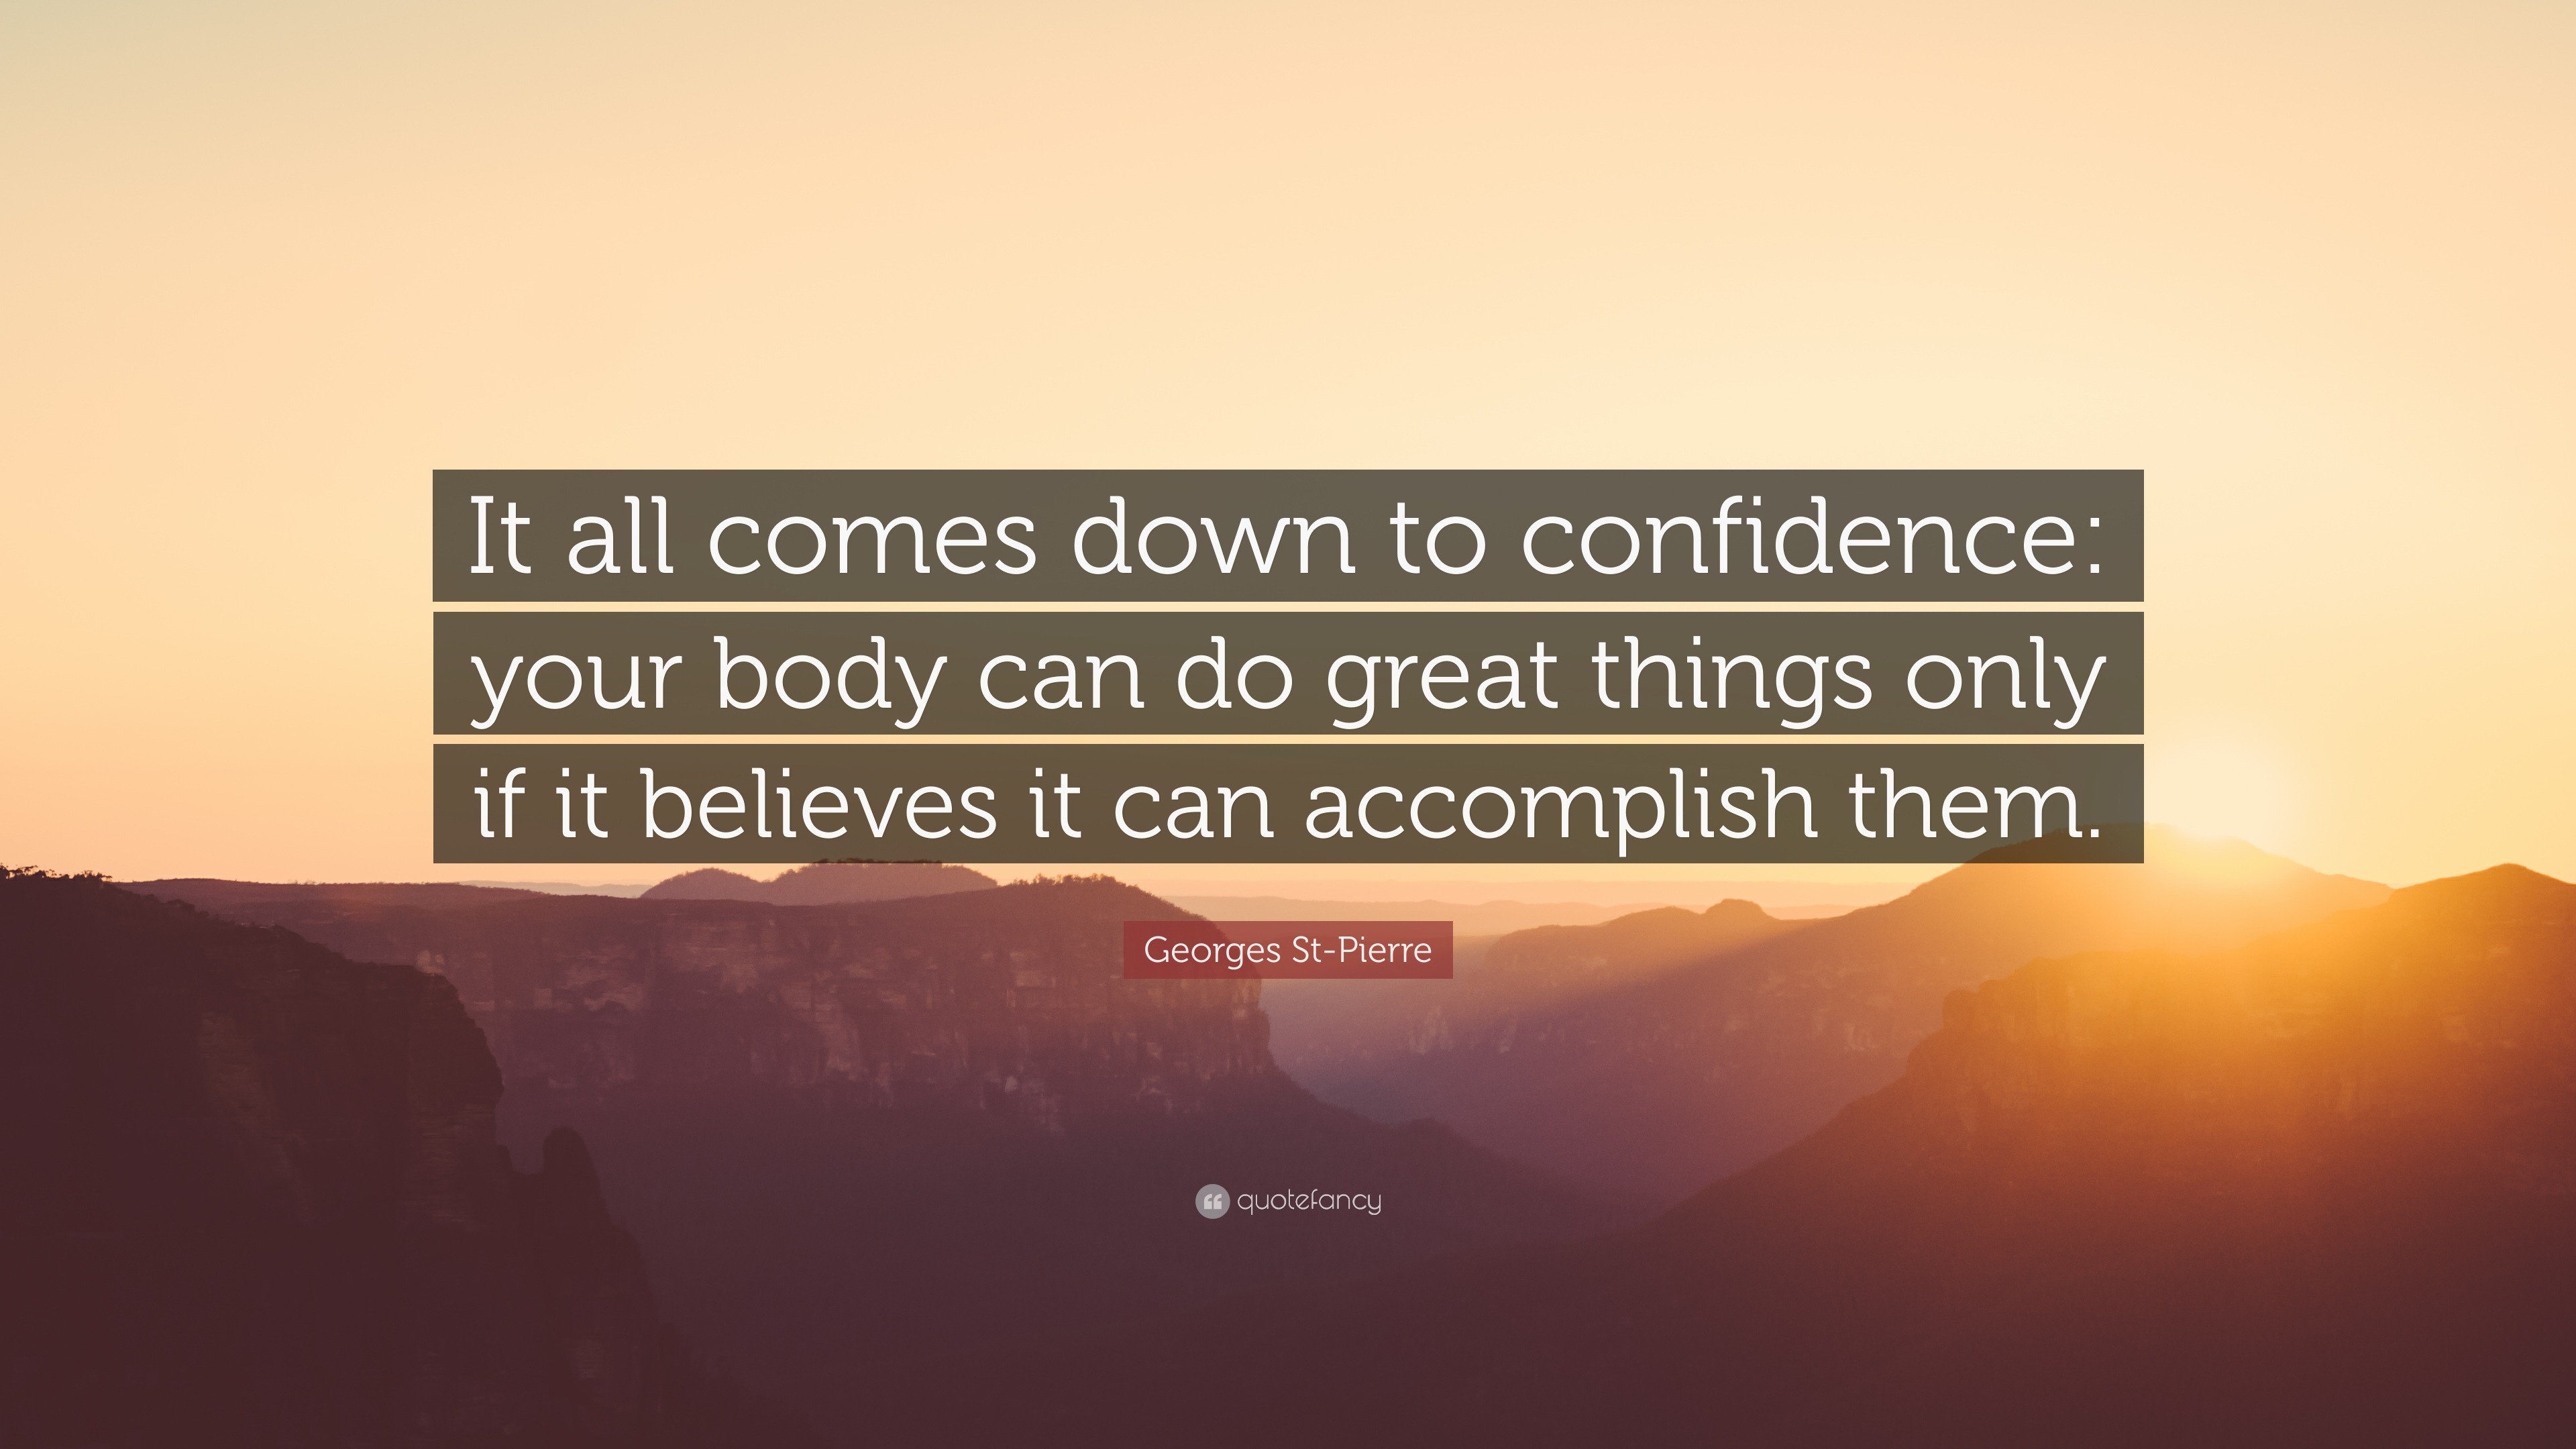 https://quotefancy.com/media/wallpaper/3840x2160/819501-Georges-St-Pierre-Quote-It-all-comes-down-to-confidence-your-body.jpg